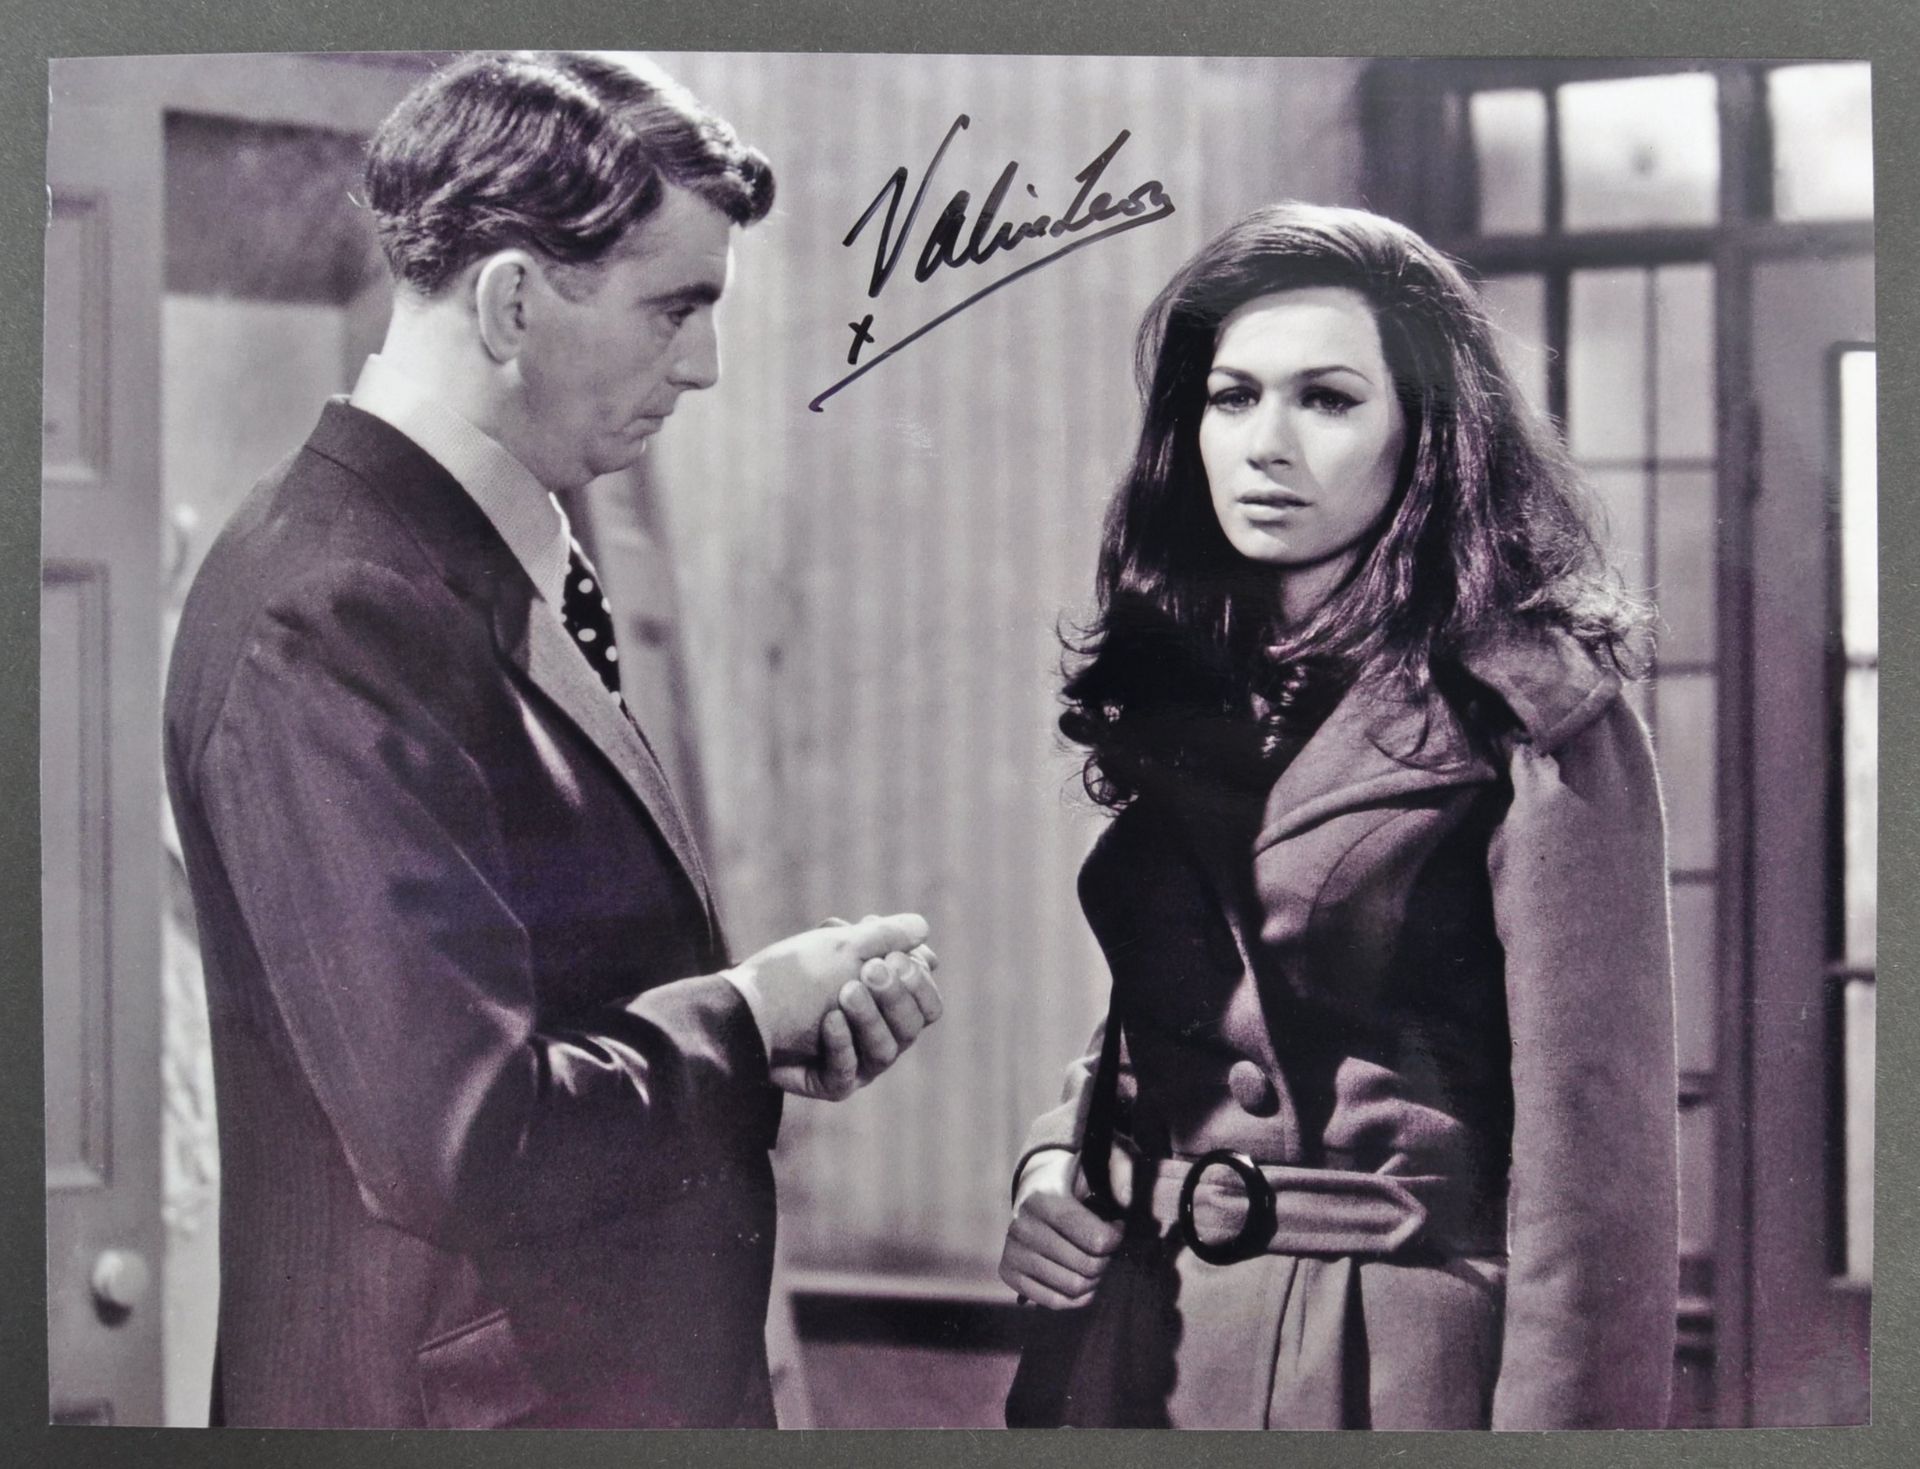 FROM THE COLLECTION OF VALERIE LEON - EARLY SIGNED